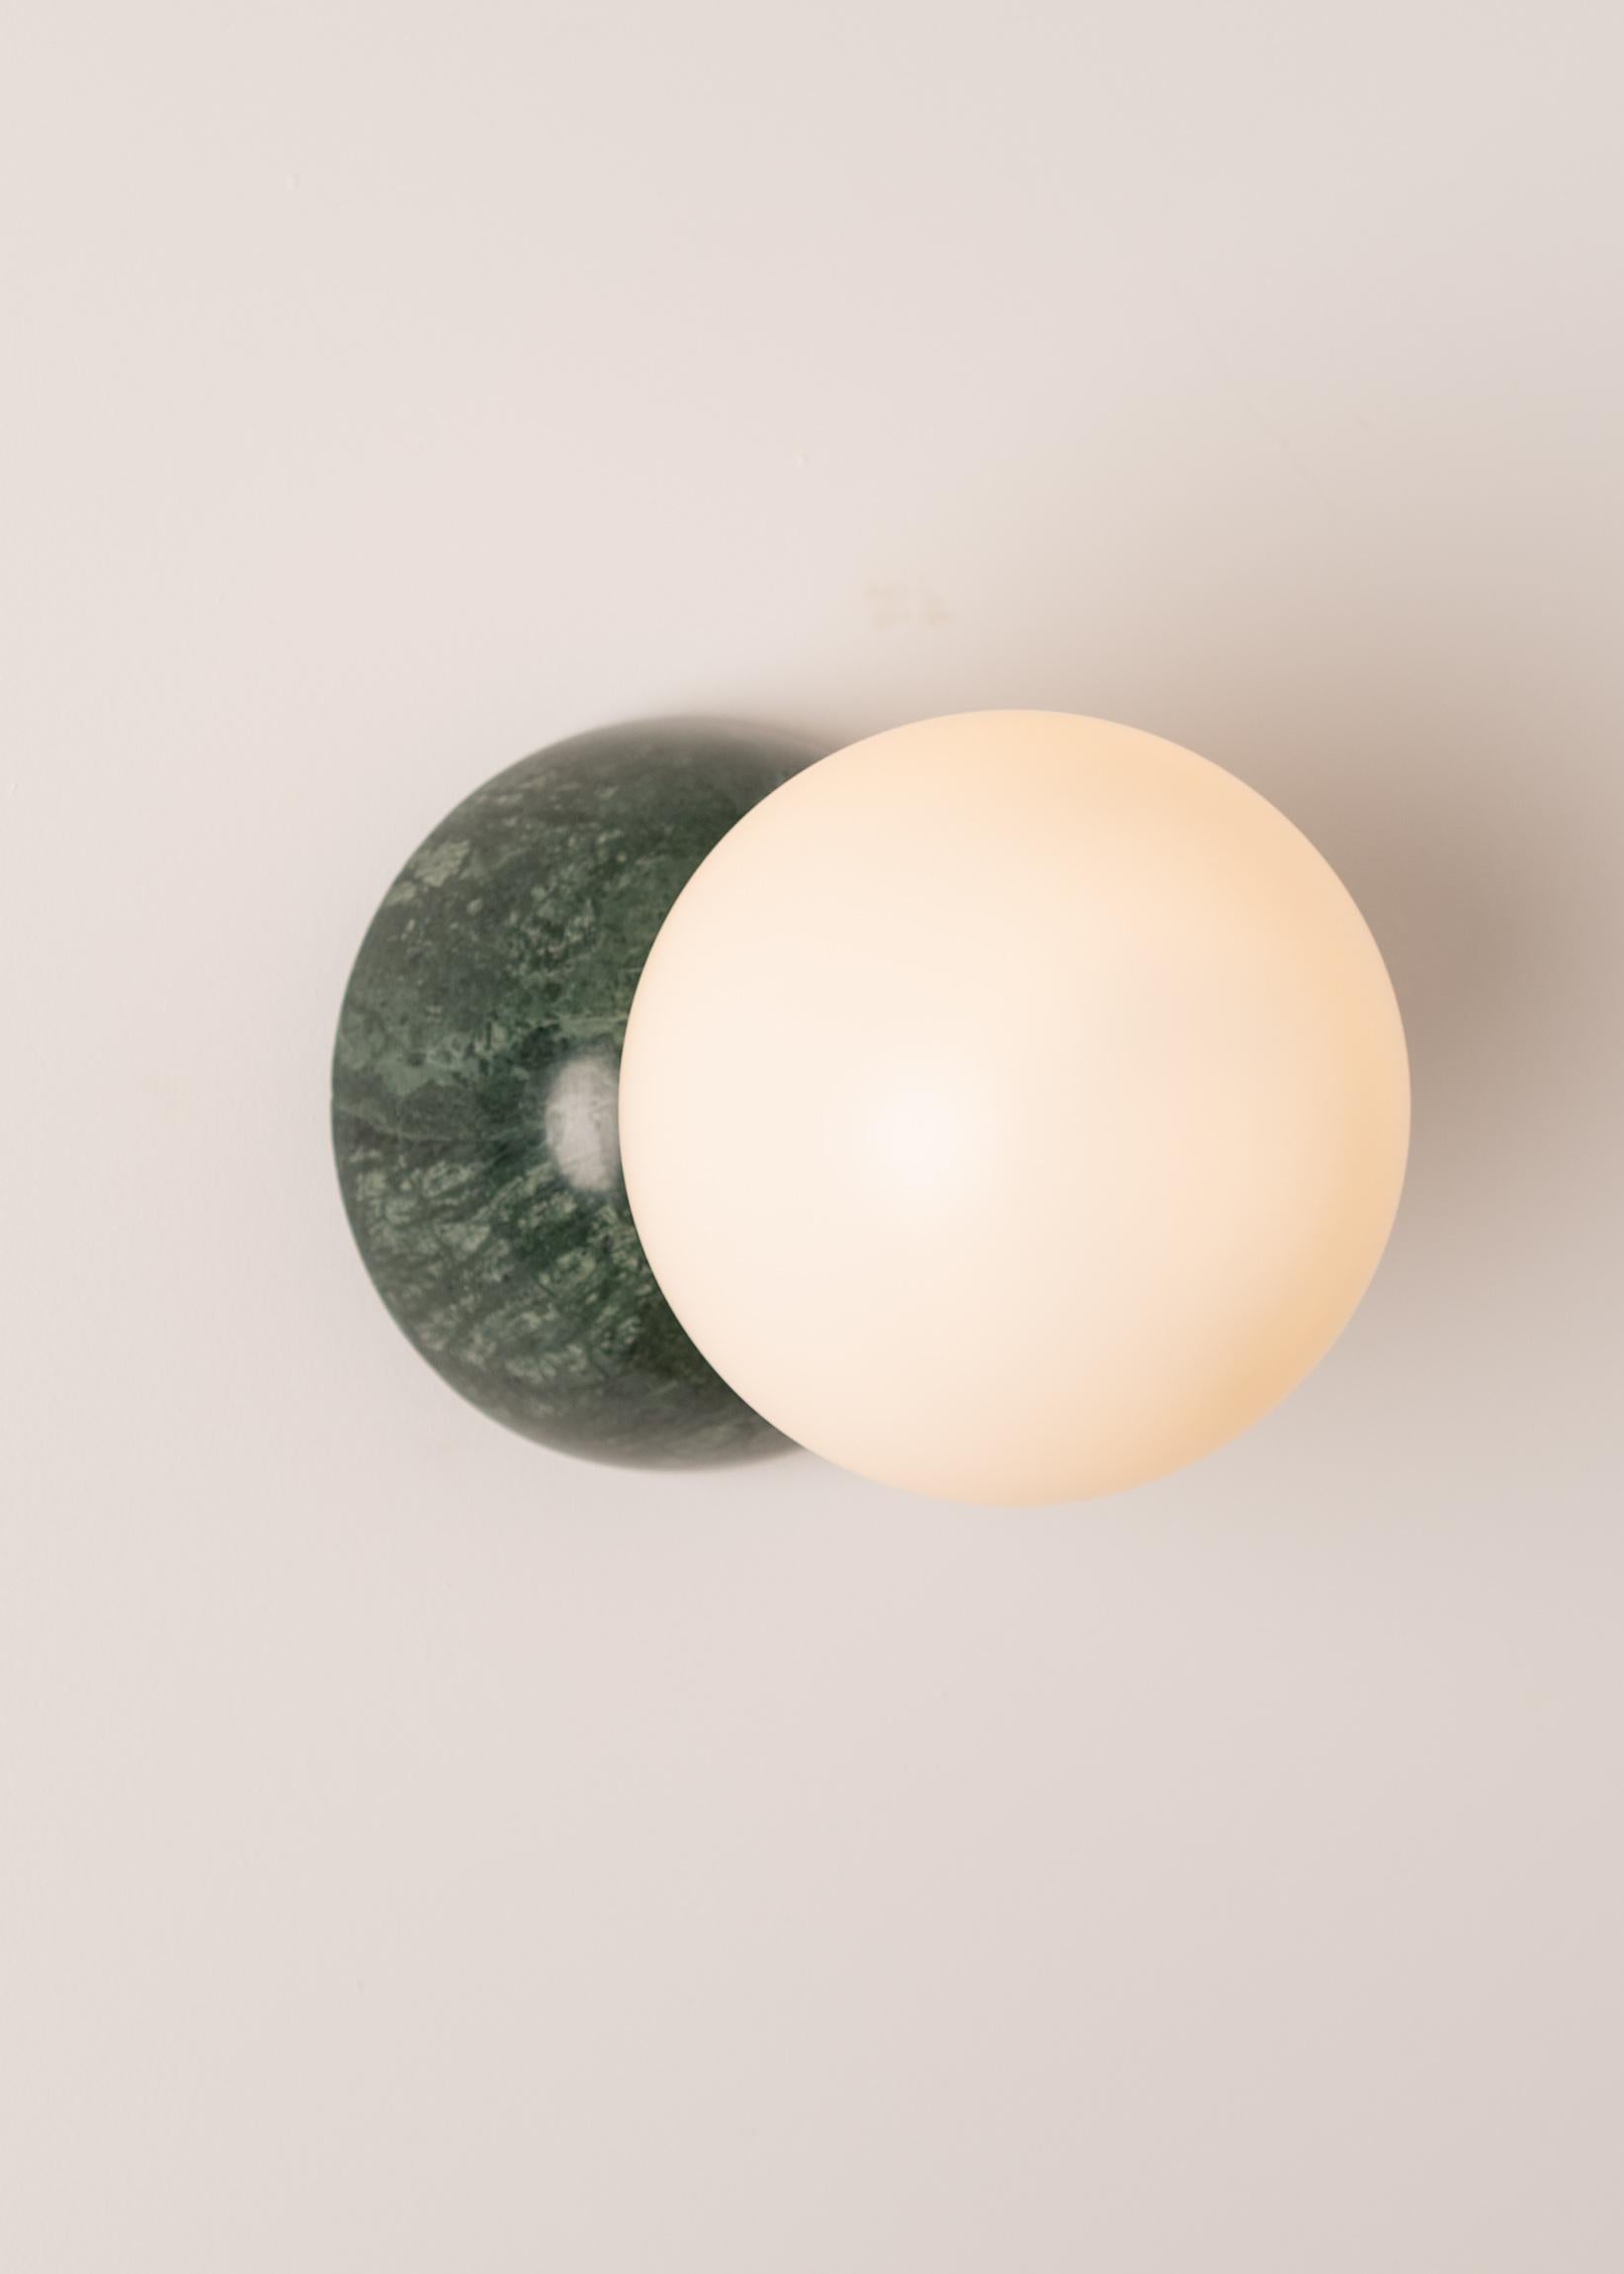 Eklipso Green Marble Wall Sconce by Simone & Marcel
Dimensions: D 19,5 x W 14 x H 14 cm.
Materials: Green marble and glass.

Available in different marble, brass, steel and alabaster options and finishes. Custom options available on request. Please